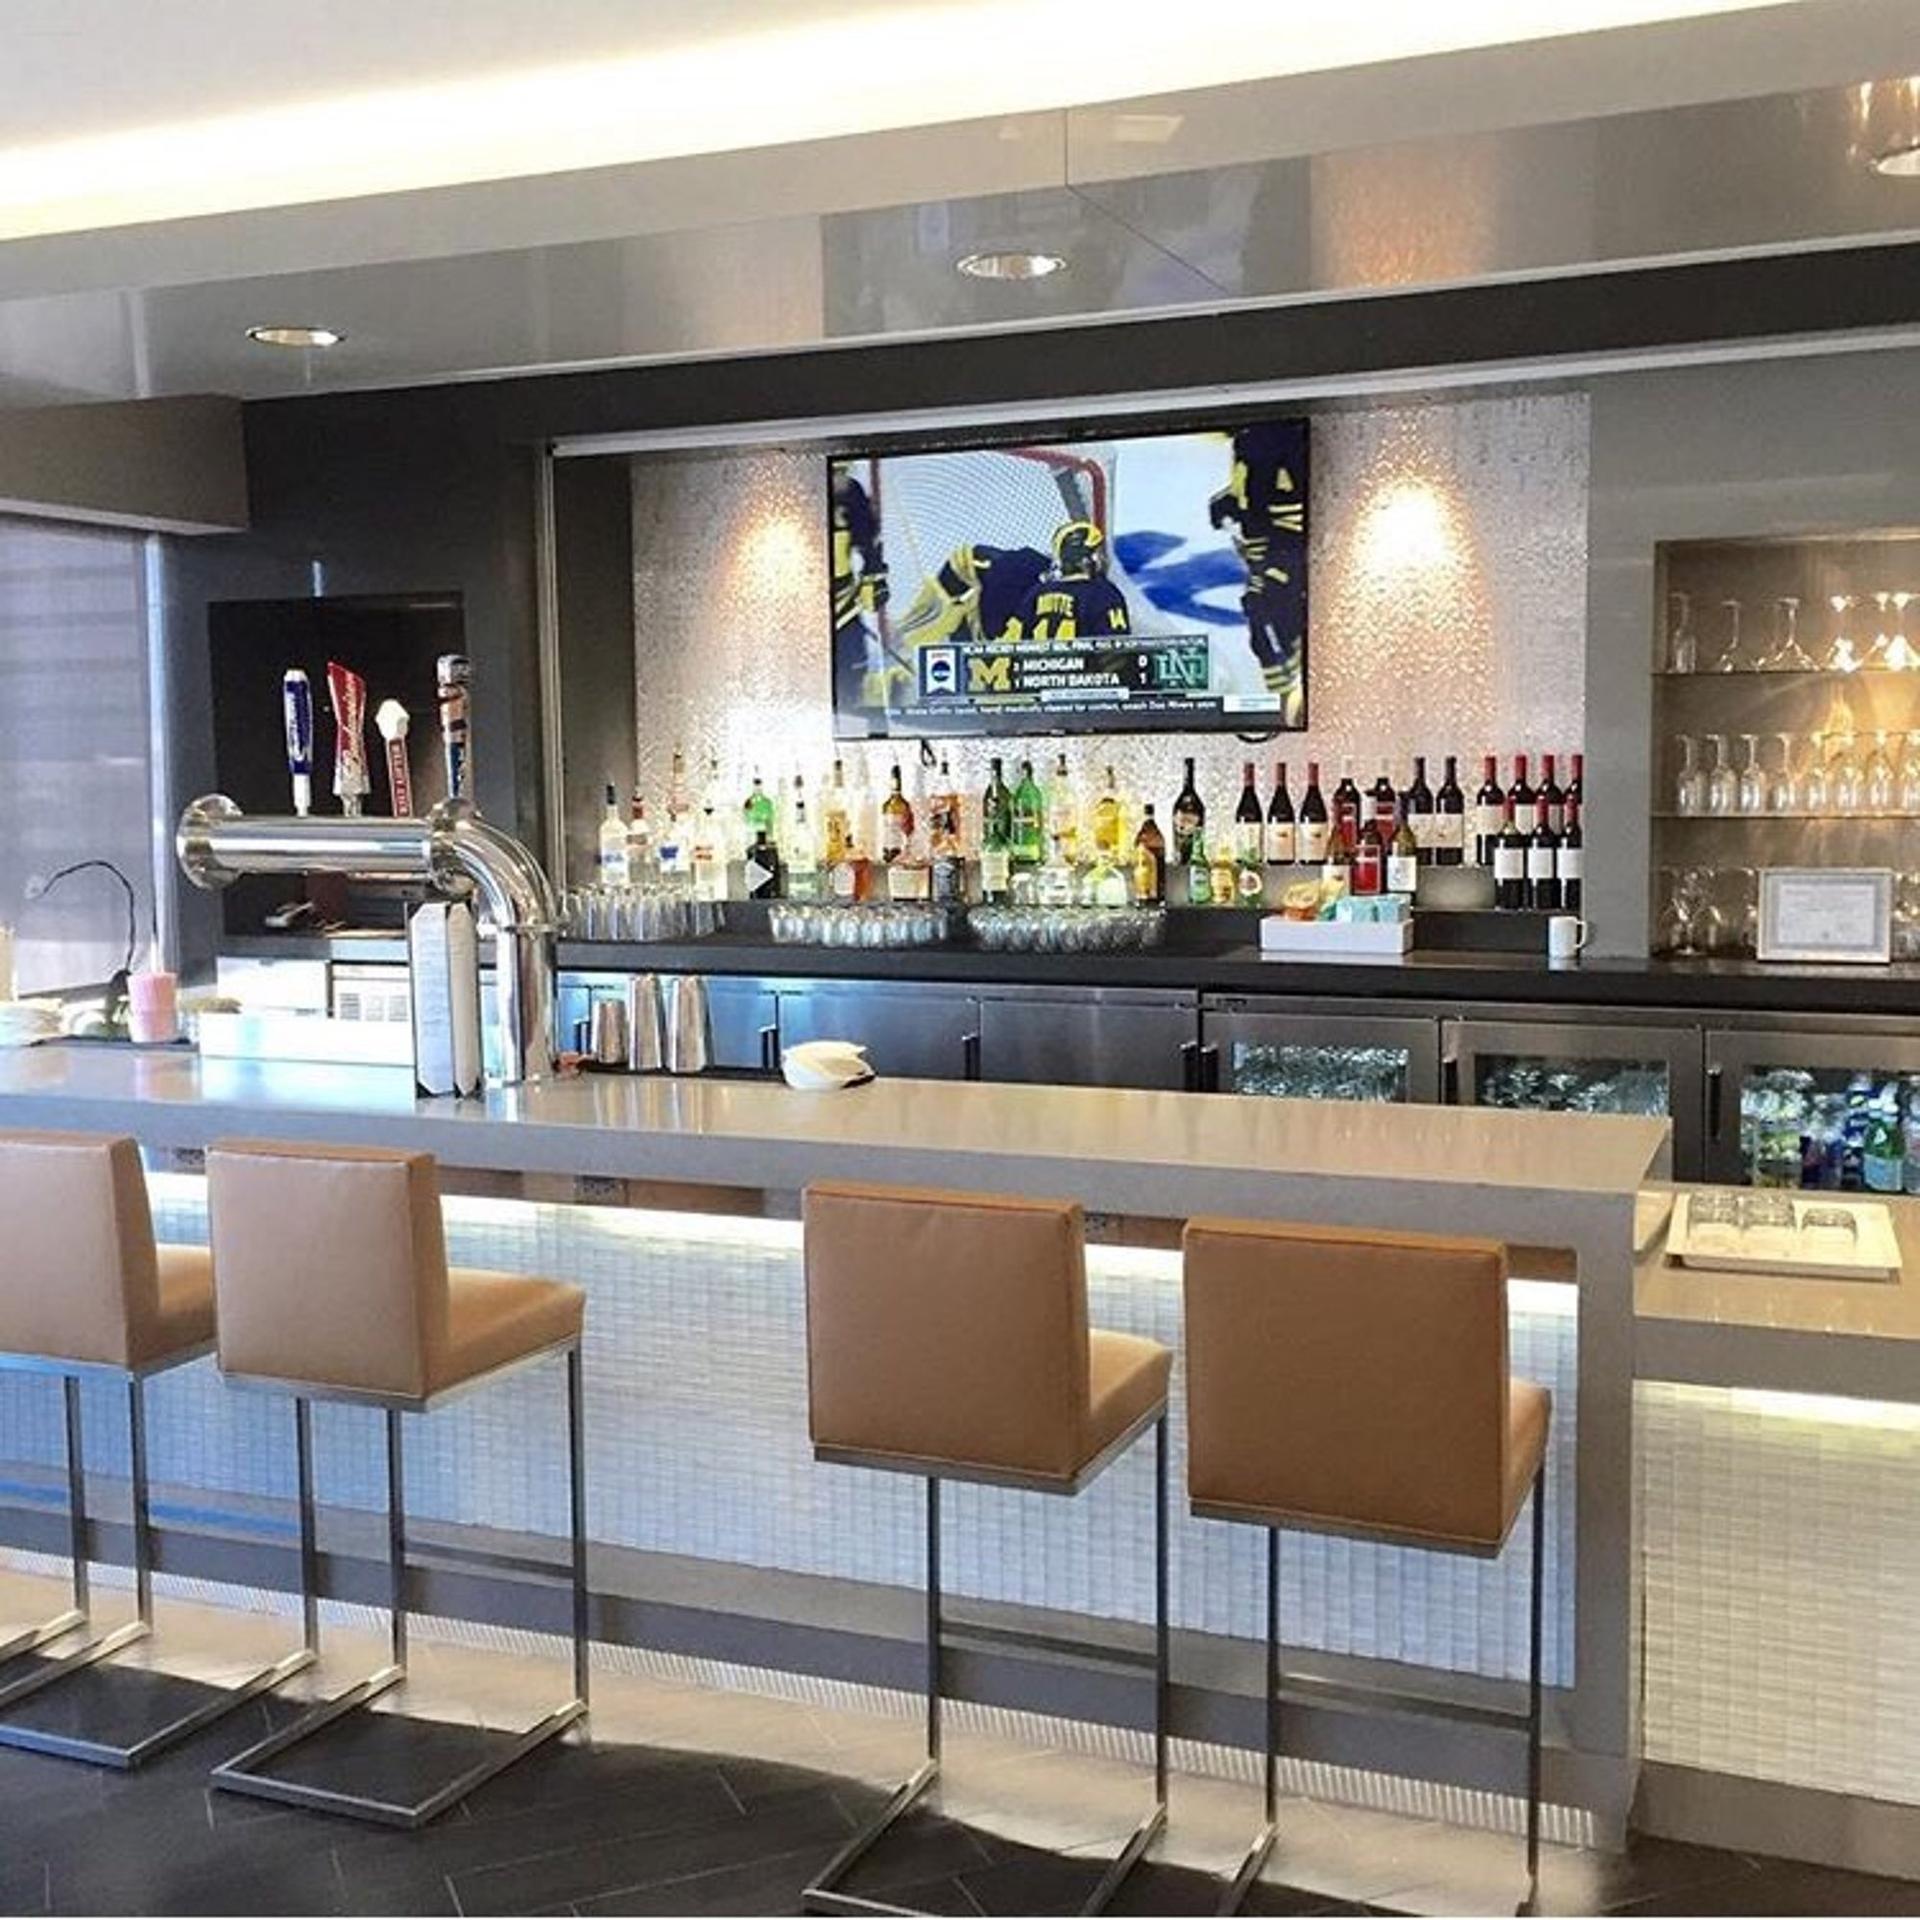 American Airlines Admirals Club (Gate A7) image 5 of 25